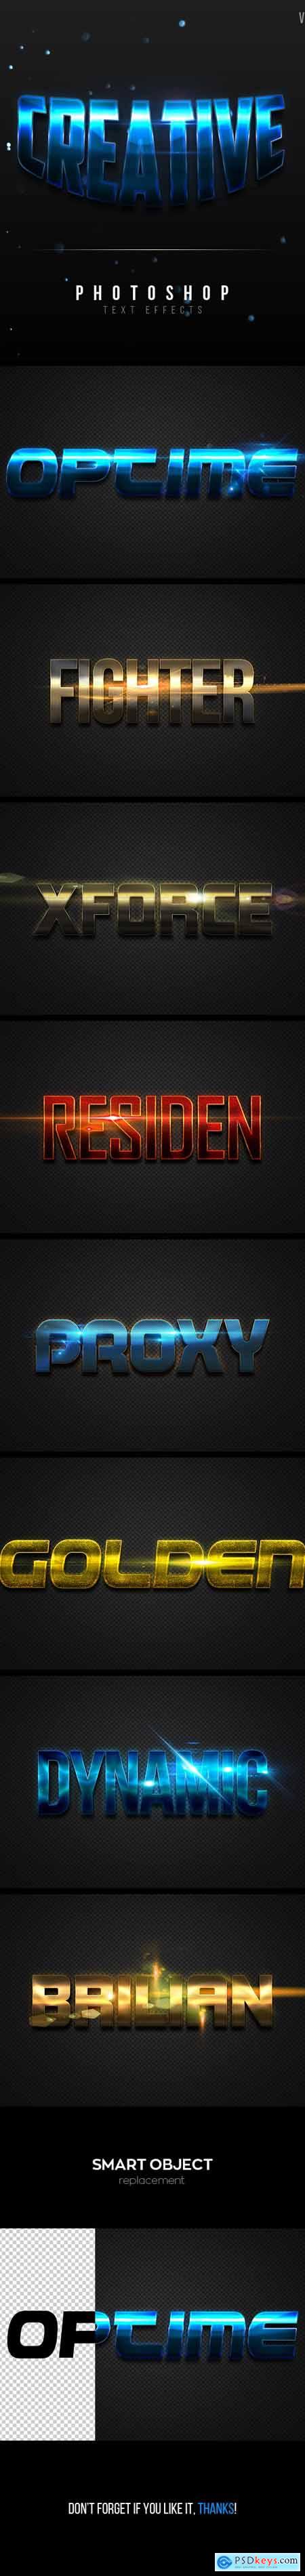 Creative Text Effects Vol.1 24093004